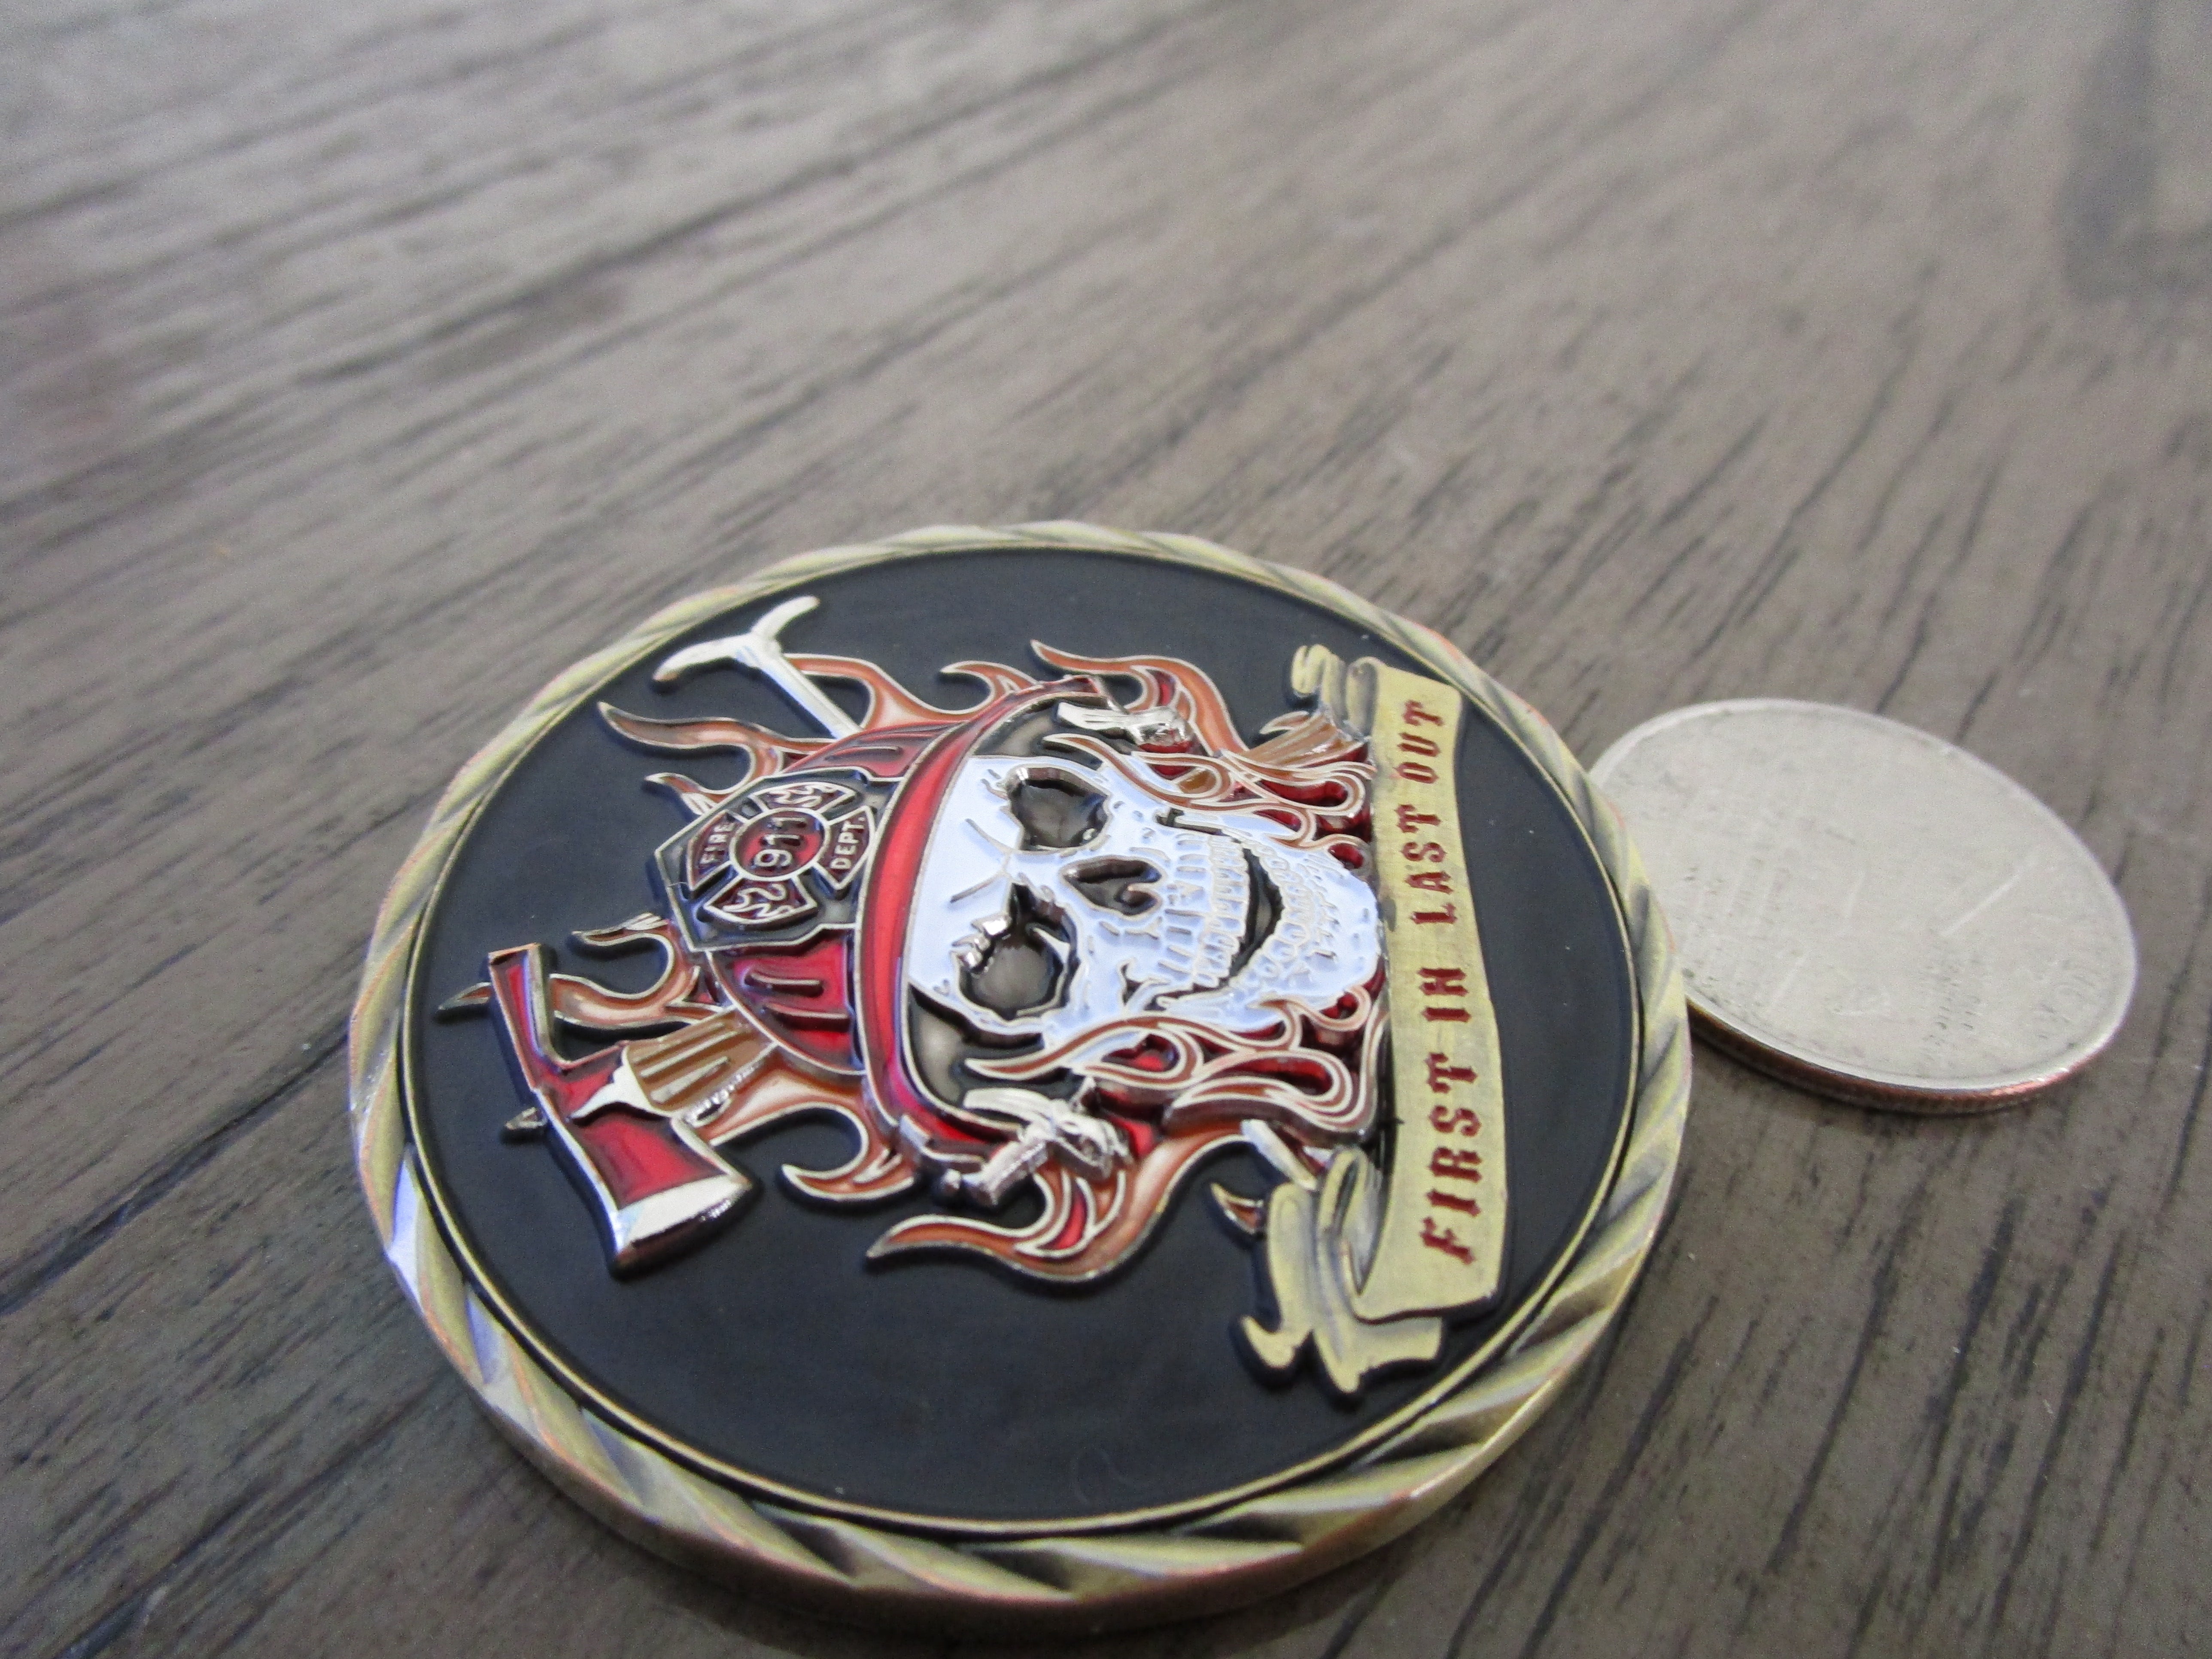 First In Last Out Fireman Skull First Responder Firefighter Challenge Coin